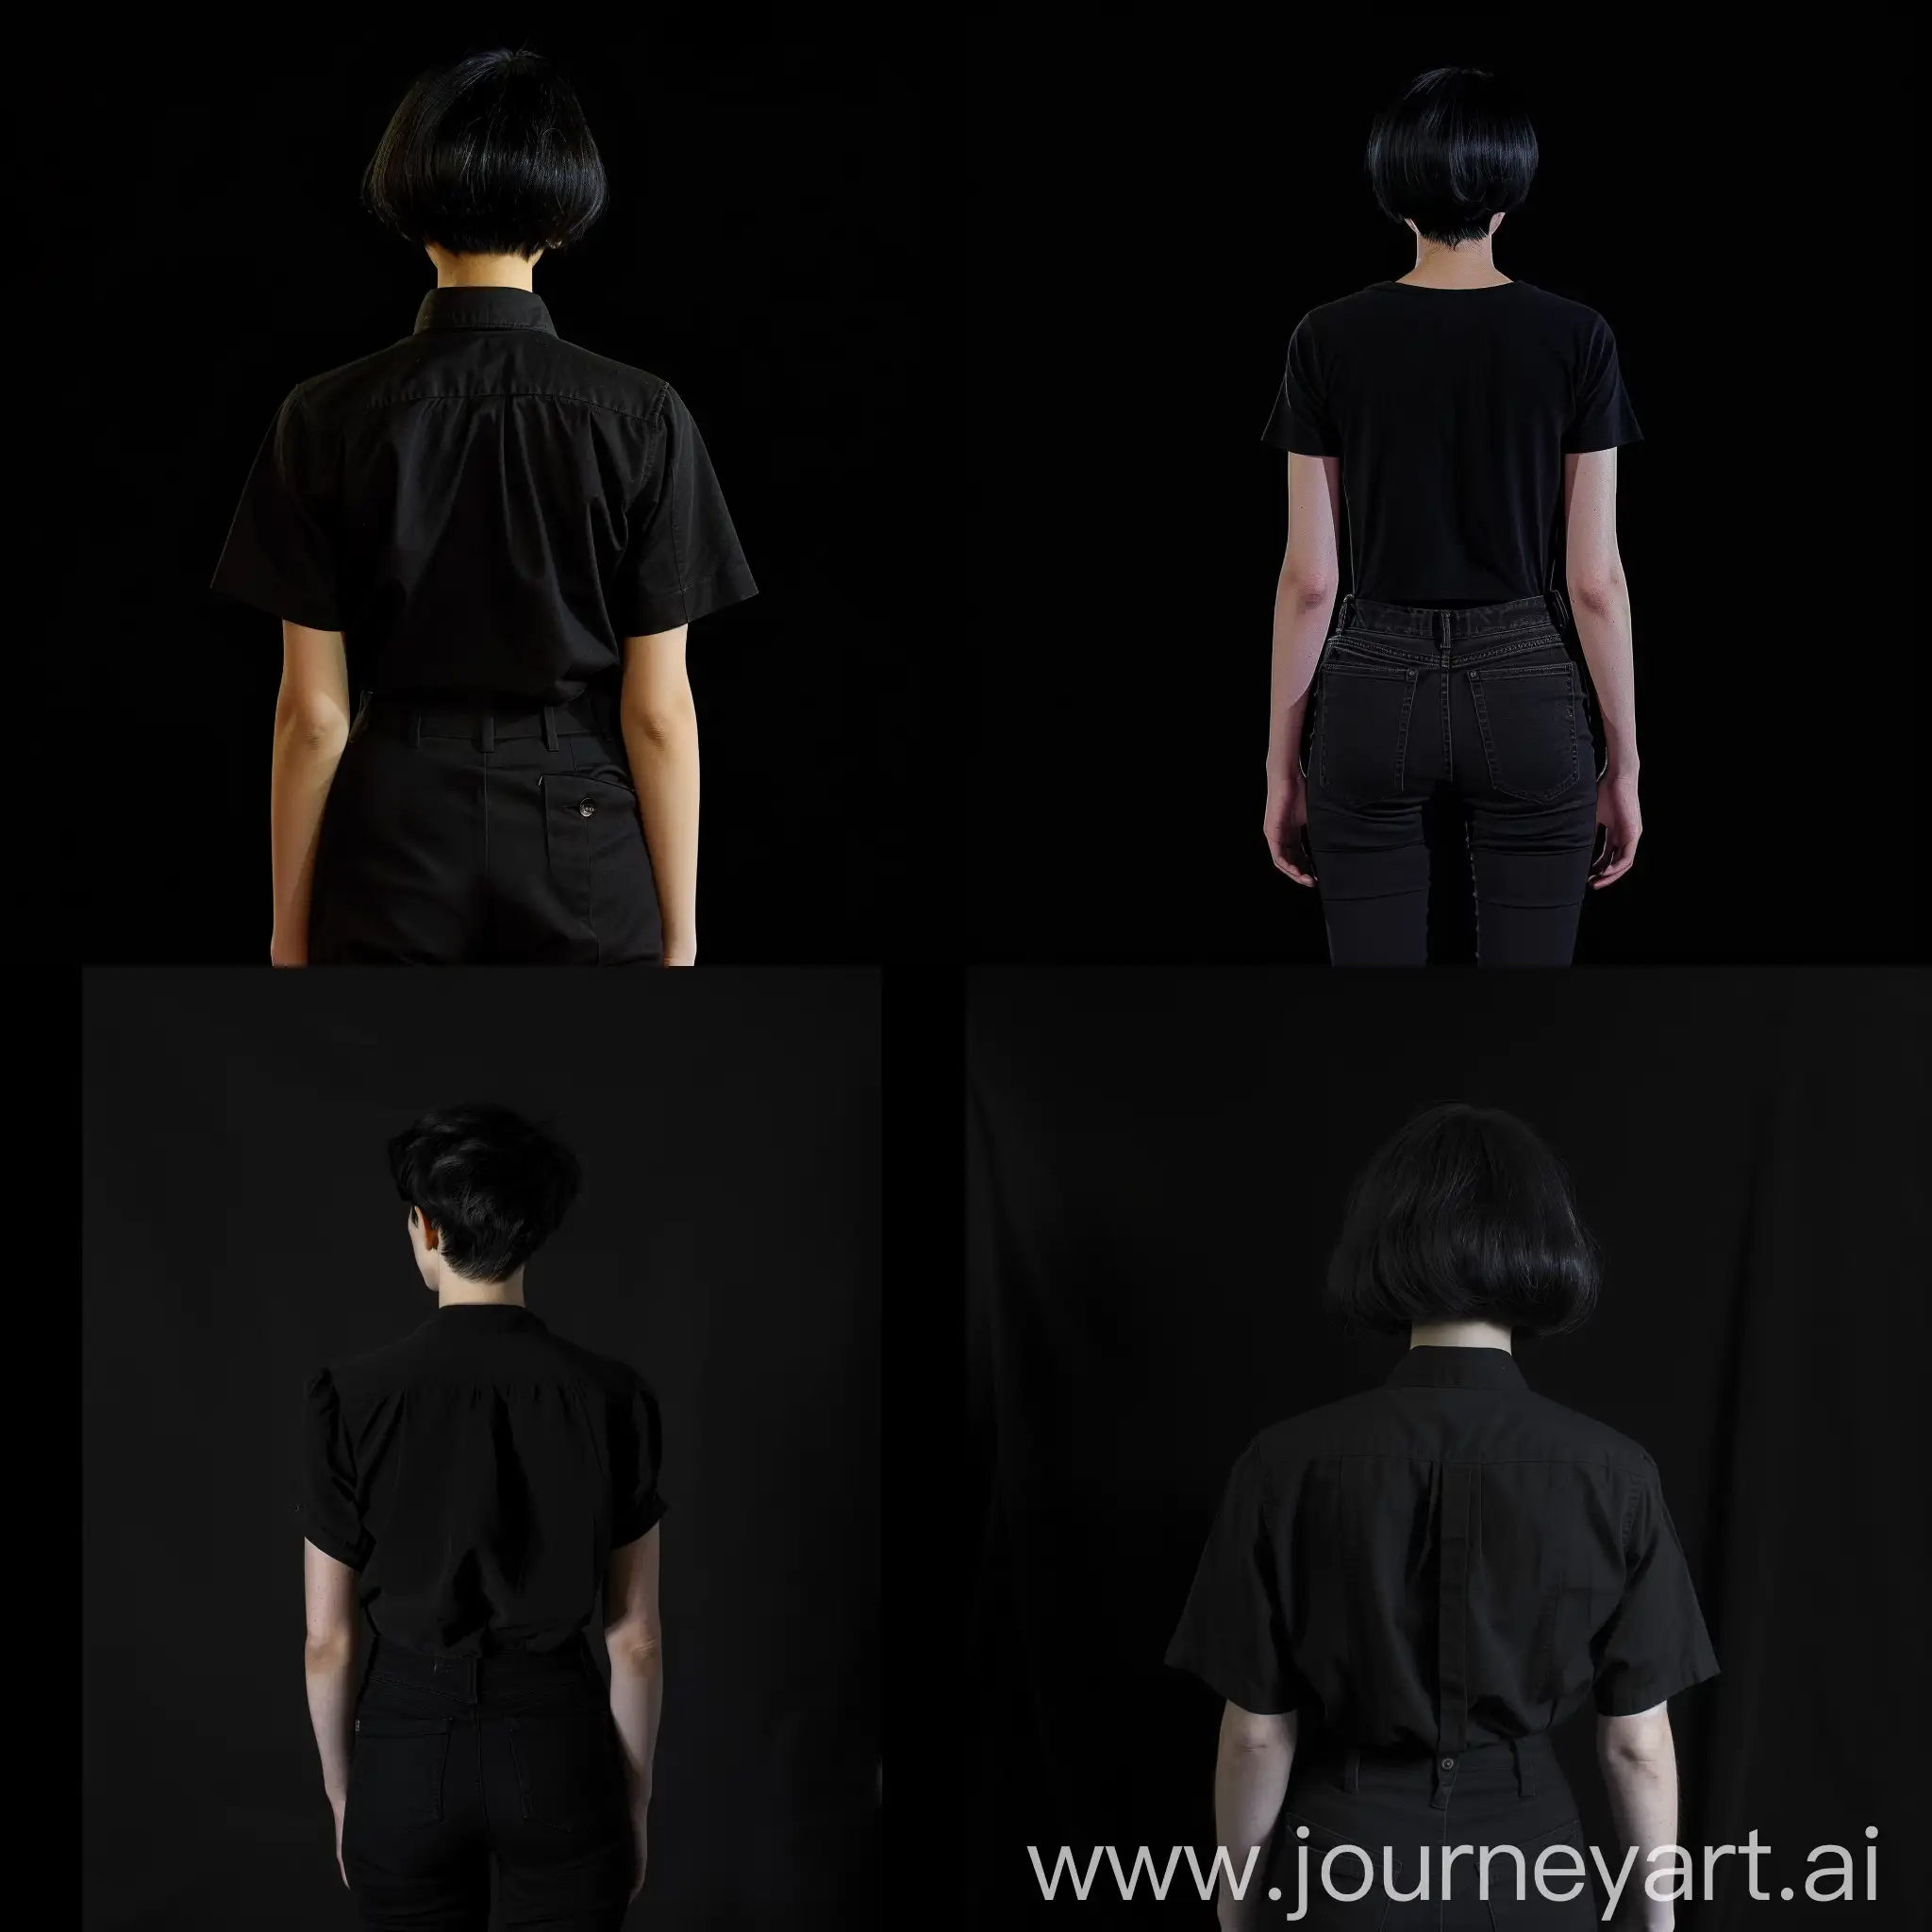 I created a woman with short black hair, facing away from the screen and wearing black pants, with an all-black background.